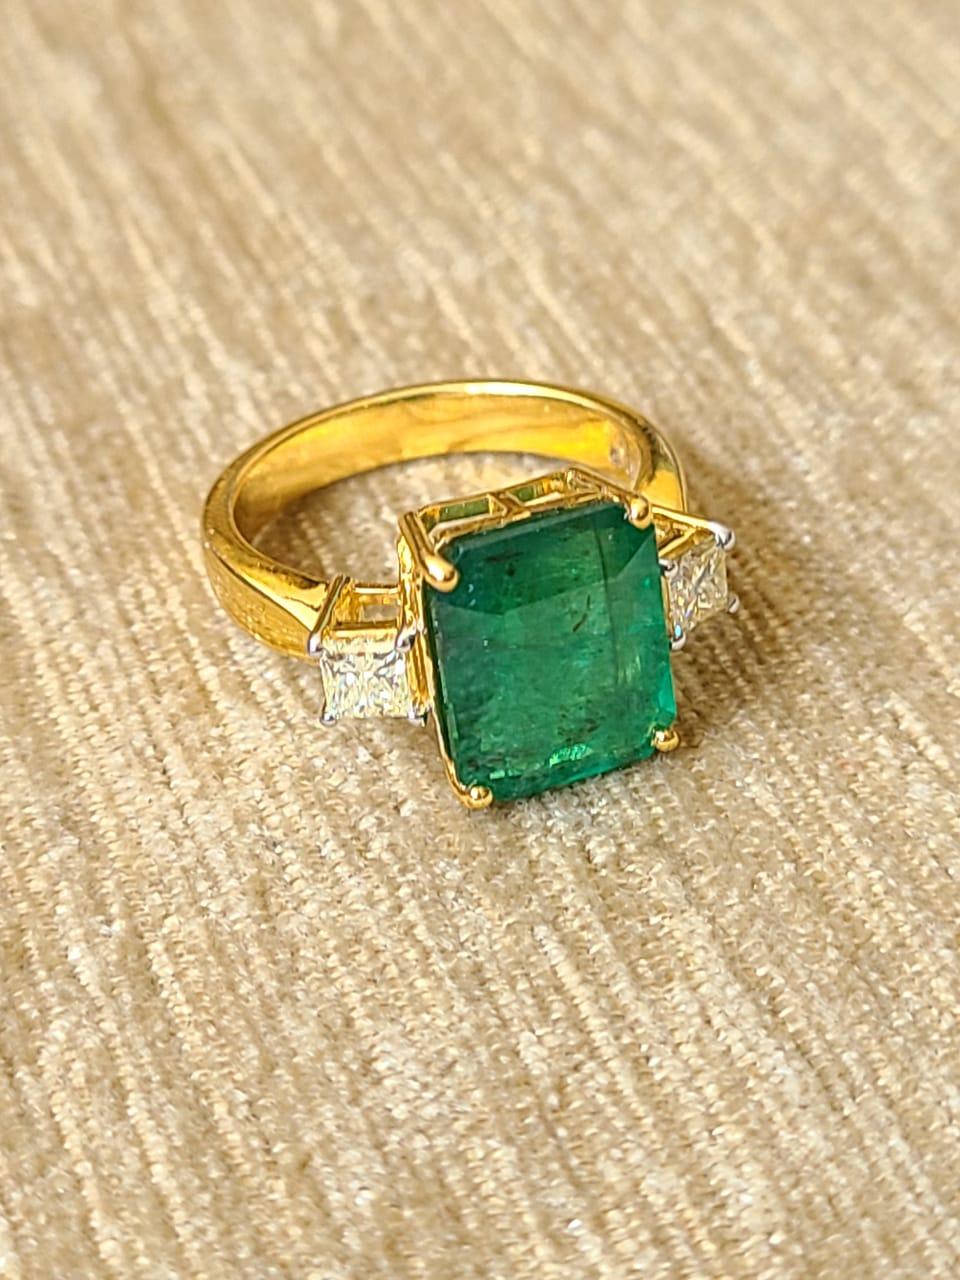 A very wearable and simple Emerald and Diamonds ring set in 18K Yellow Gold. The Emerald, is of Zambian origin, weighs 4.34 carats. The Emerald is completely natural, without any treatment. The weight of the diamonds is 0.45 carats. The net Gold